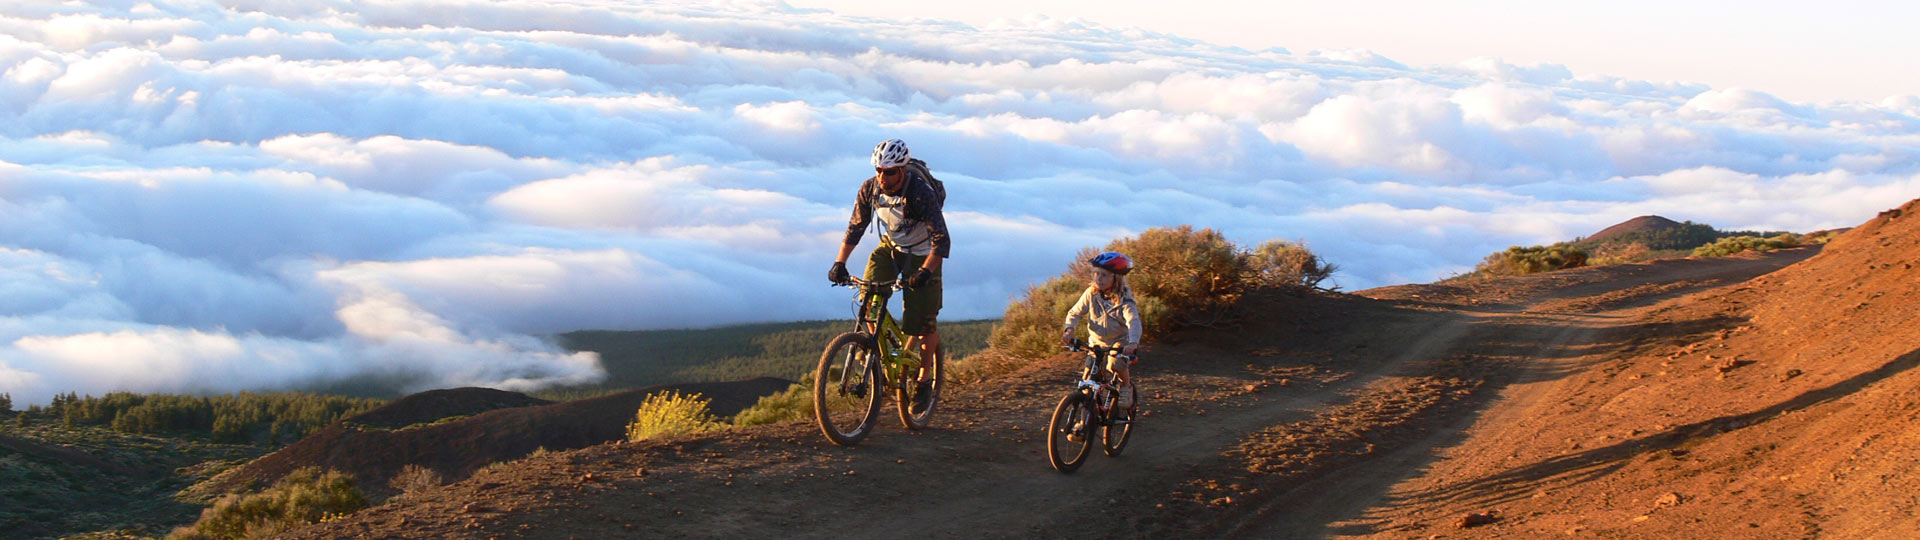 Family mountain biking in Tenerife above a sea of clouds 